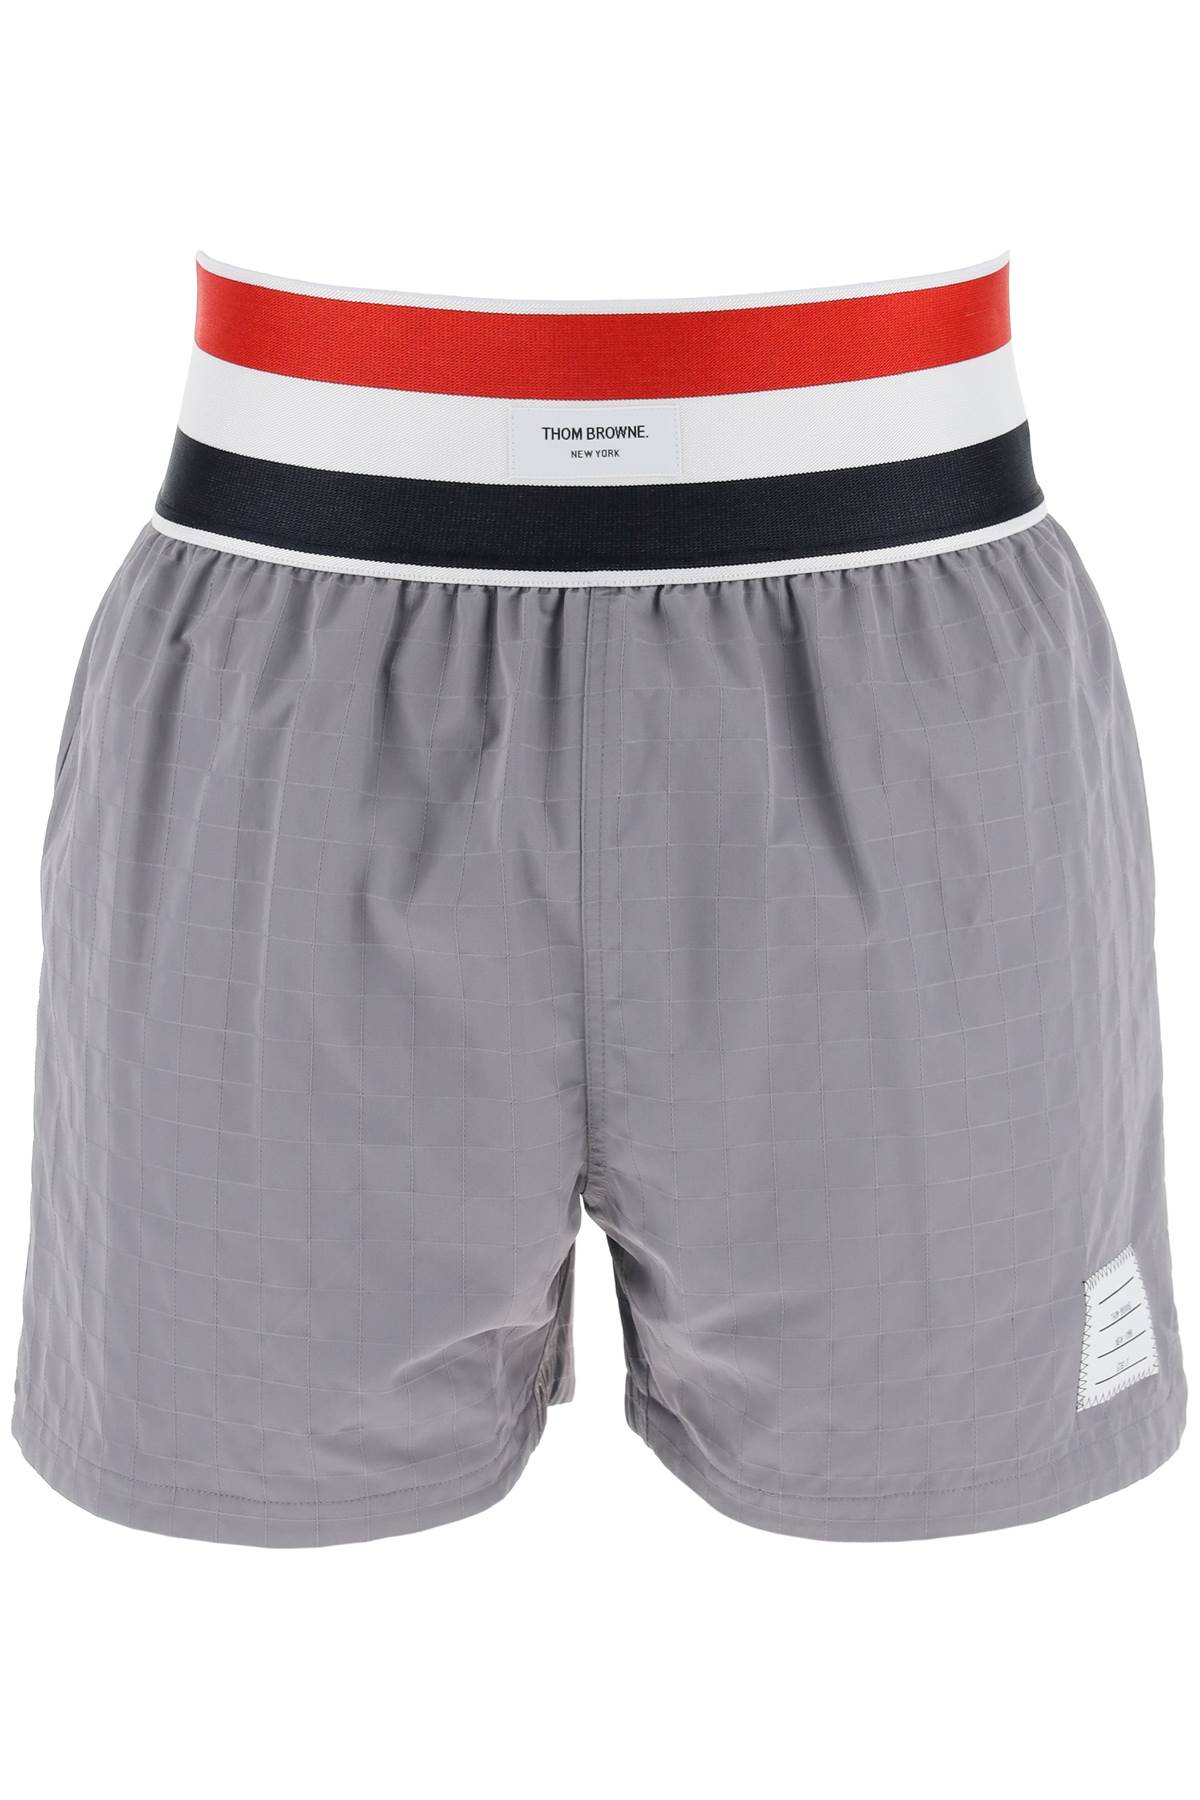 Thom browne nylon bermuda shorts with elastic band in red-0